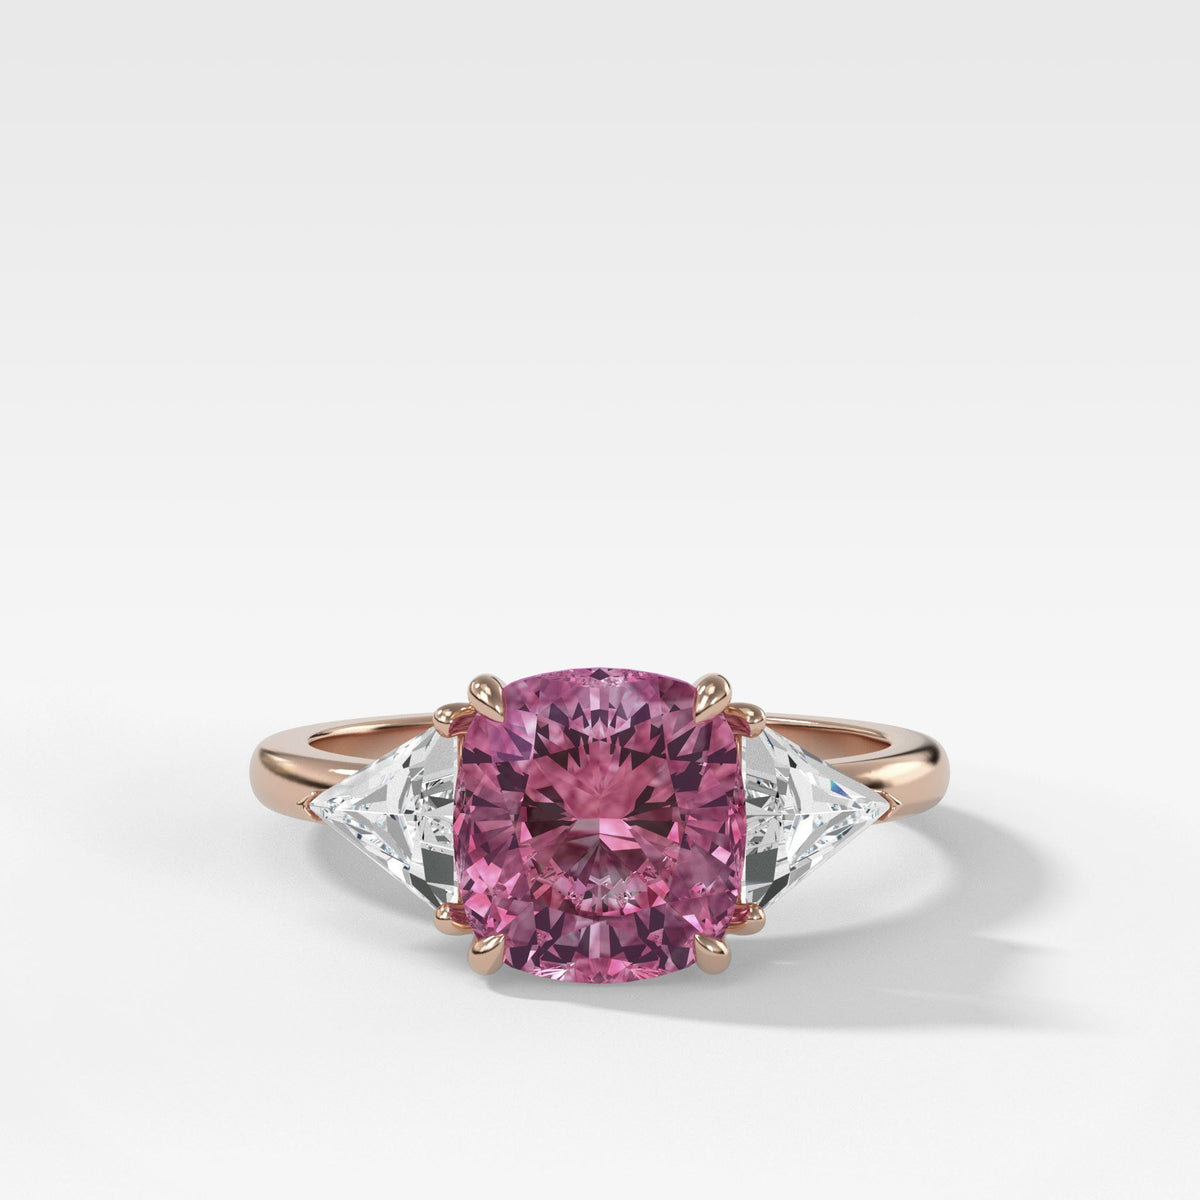 Vintage 2.35ct Pink Sapphire Three Stone Ring with Trillion Diamond Sides by Good Stone in Rose Gold